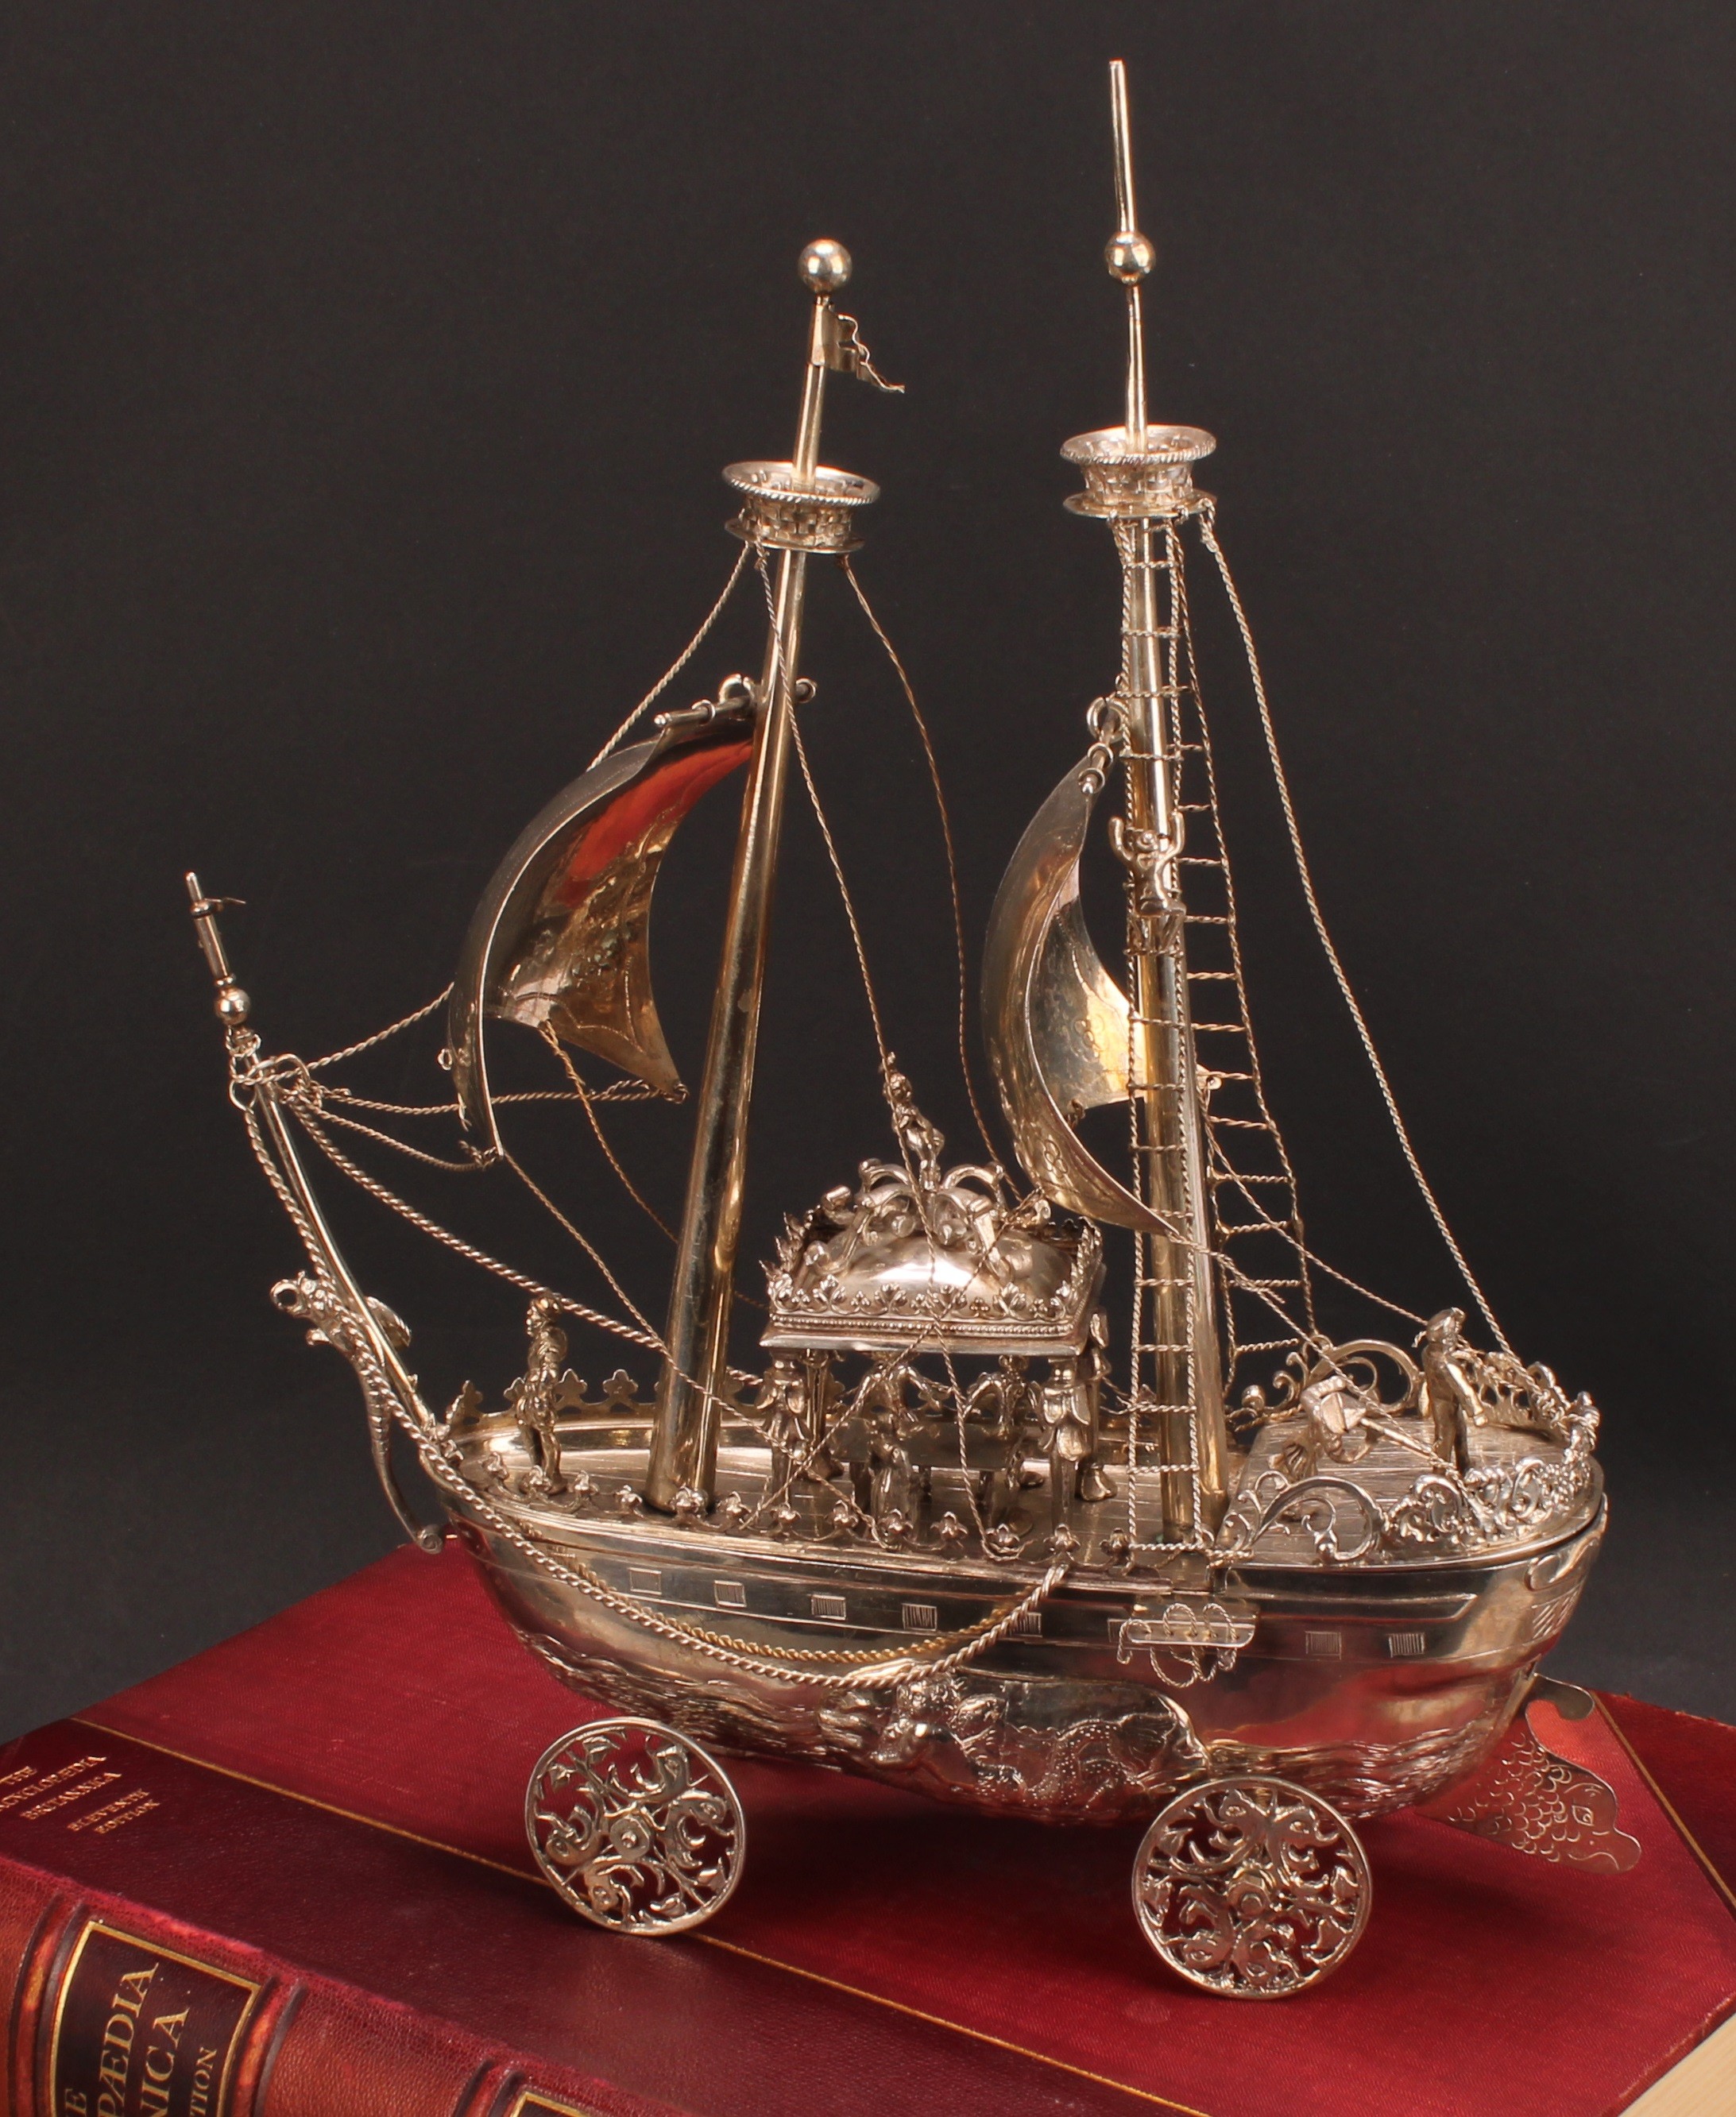 A late 19th century Dutch silver nef, typically modelled as a two-masted ship, with billowing